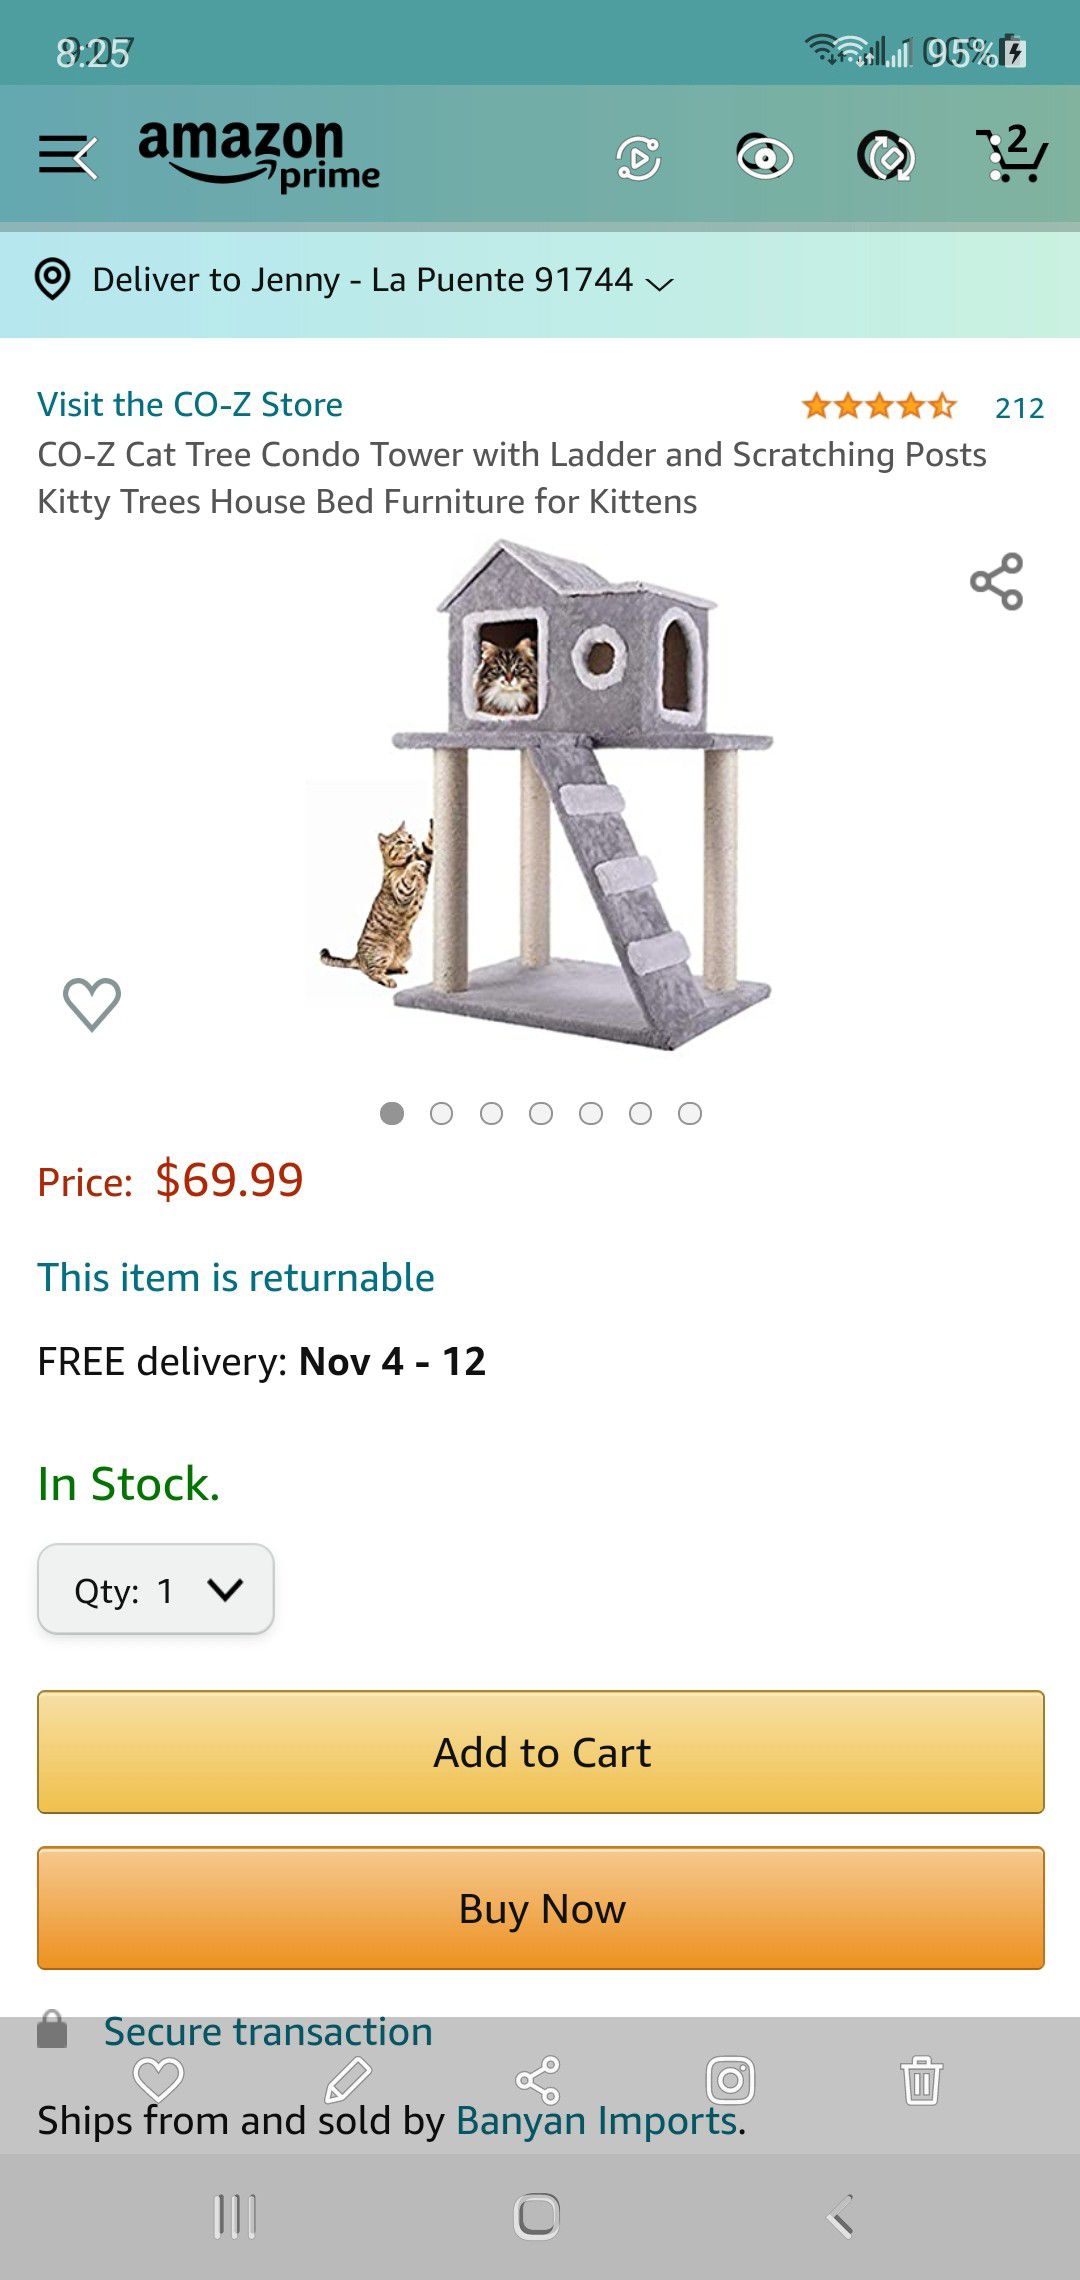 Brand new co-z cat tree condo w/ladder and scratching posts kitty trees house bed furniture for kittens